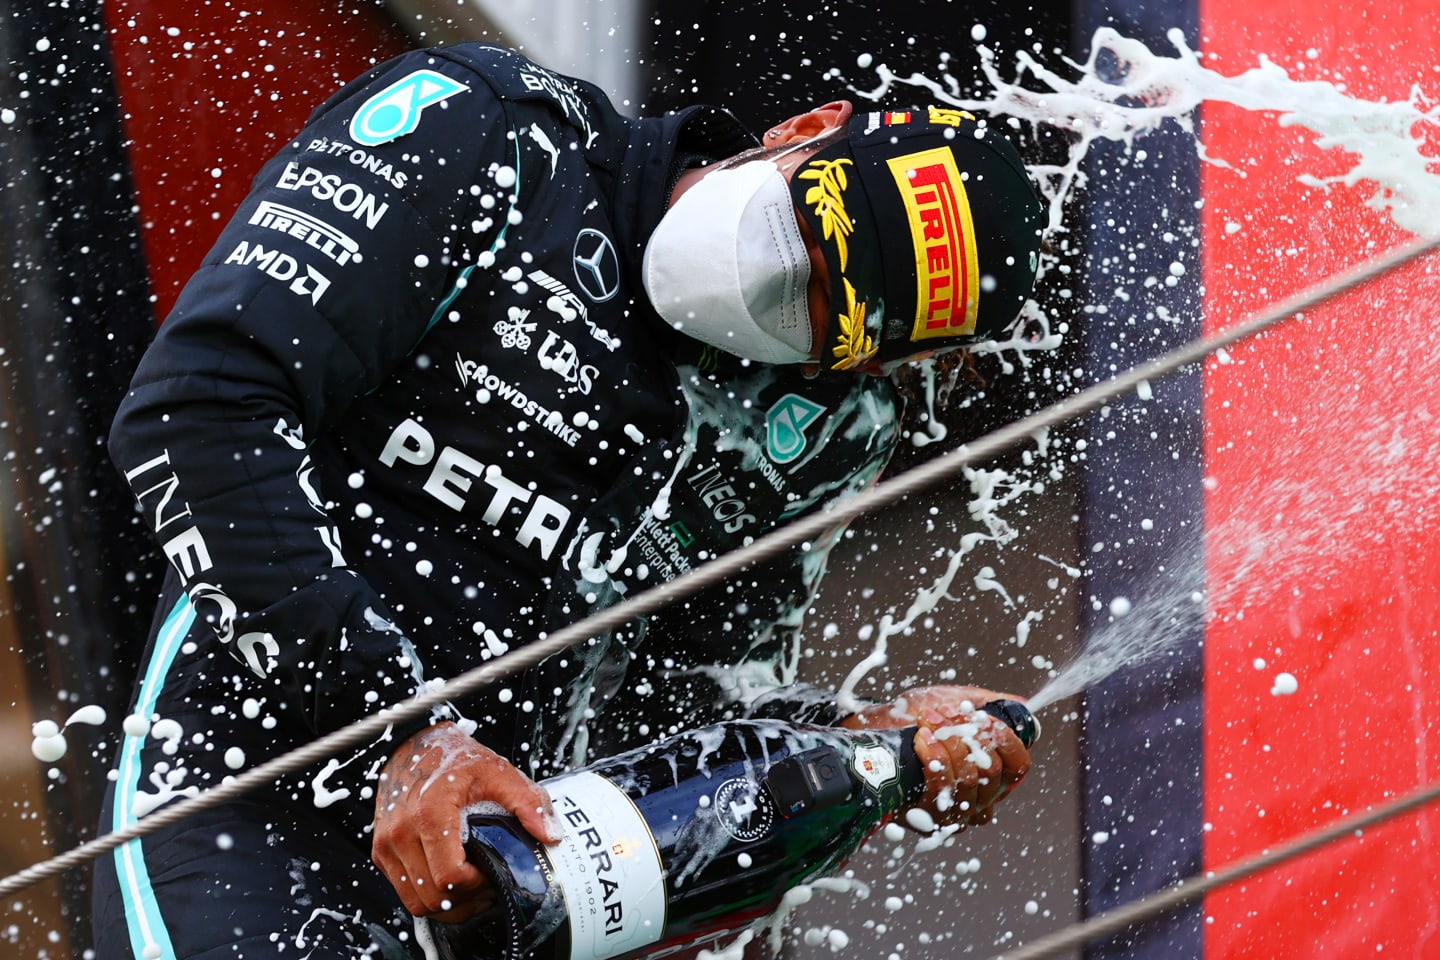 BARCELONA, SPAIN - MAY 09:  Lewis Hamilton of Great Britain  Mercedes AMG Petronas celebrates on the podium after winning the F1 Grand Prix of Spain at Circuit de Barcelona-Catalunya on May 09, 2021 in Barcelona, Spain. (Photo by Dan Istitene - Formula 1/Formula 1 via Getty Images)